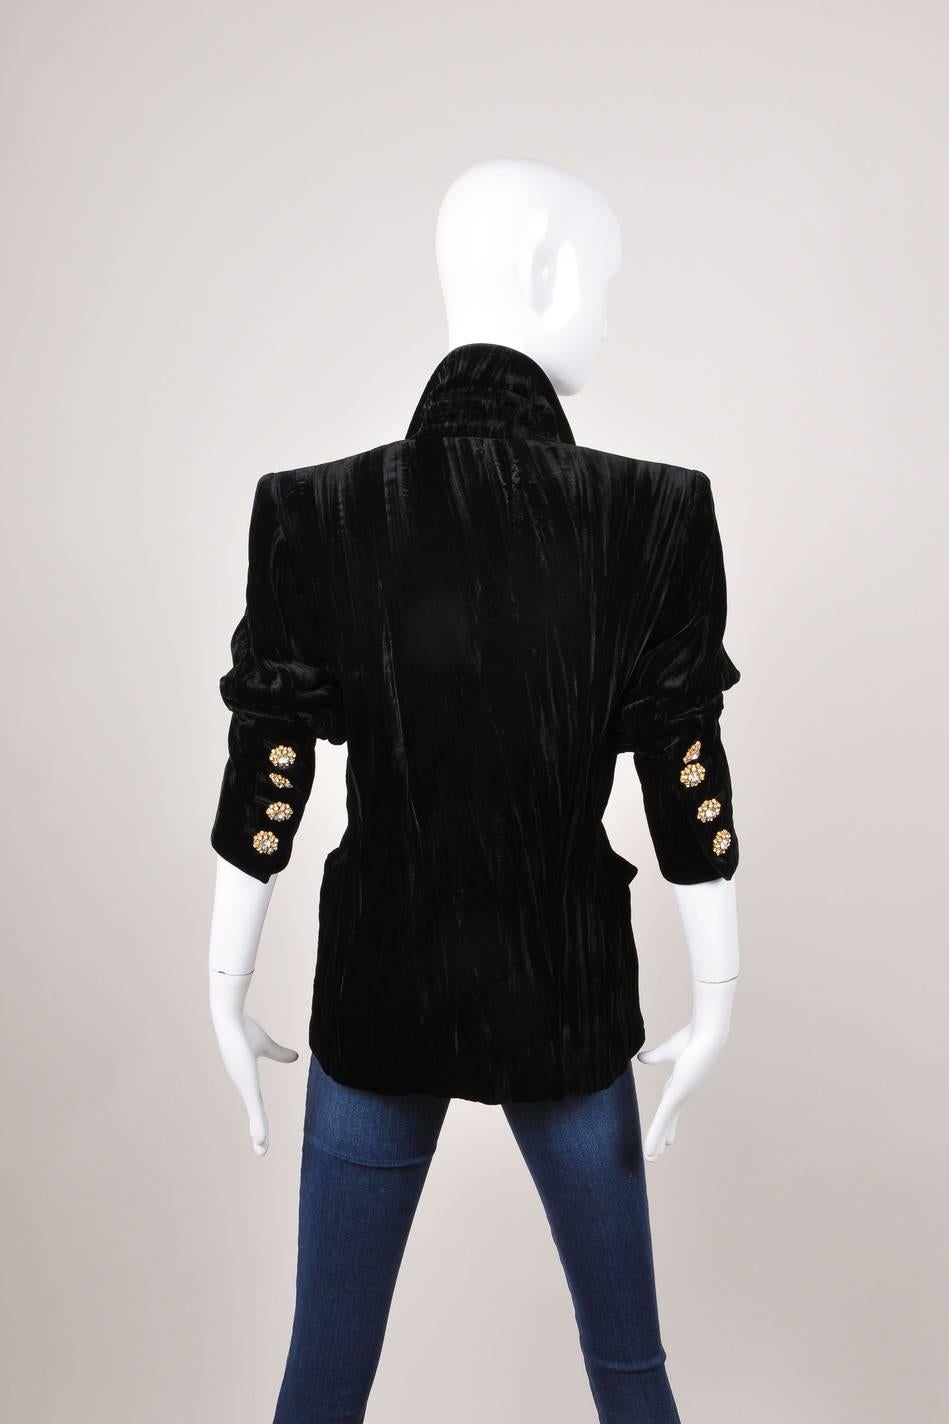 This crushed black velvet blazer features gold-tone and crystal rhinestone trim buttons at front fastening and at sleeve openings. Satin lapels. Lightly padded shoulders. Front hip pockets. Lined.

Additional measurements:
Sleeve length: